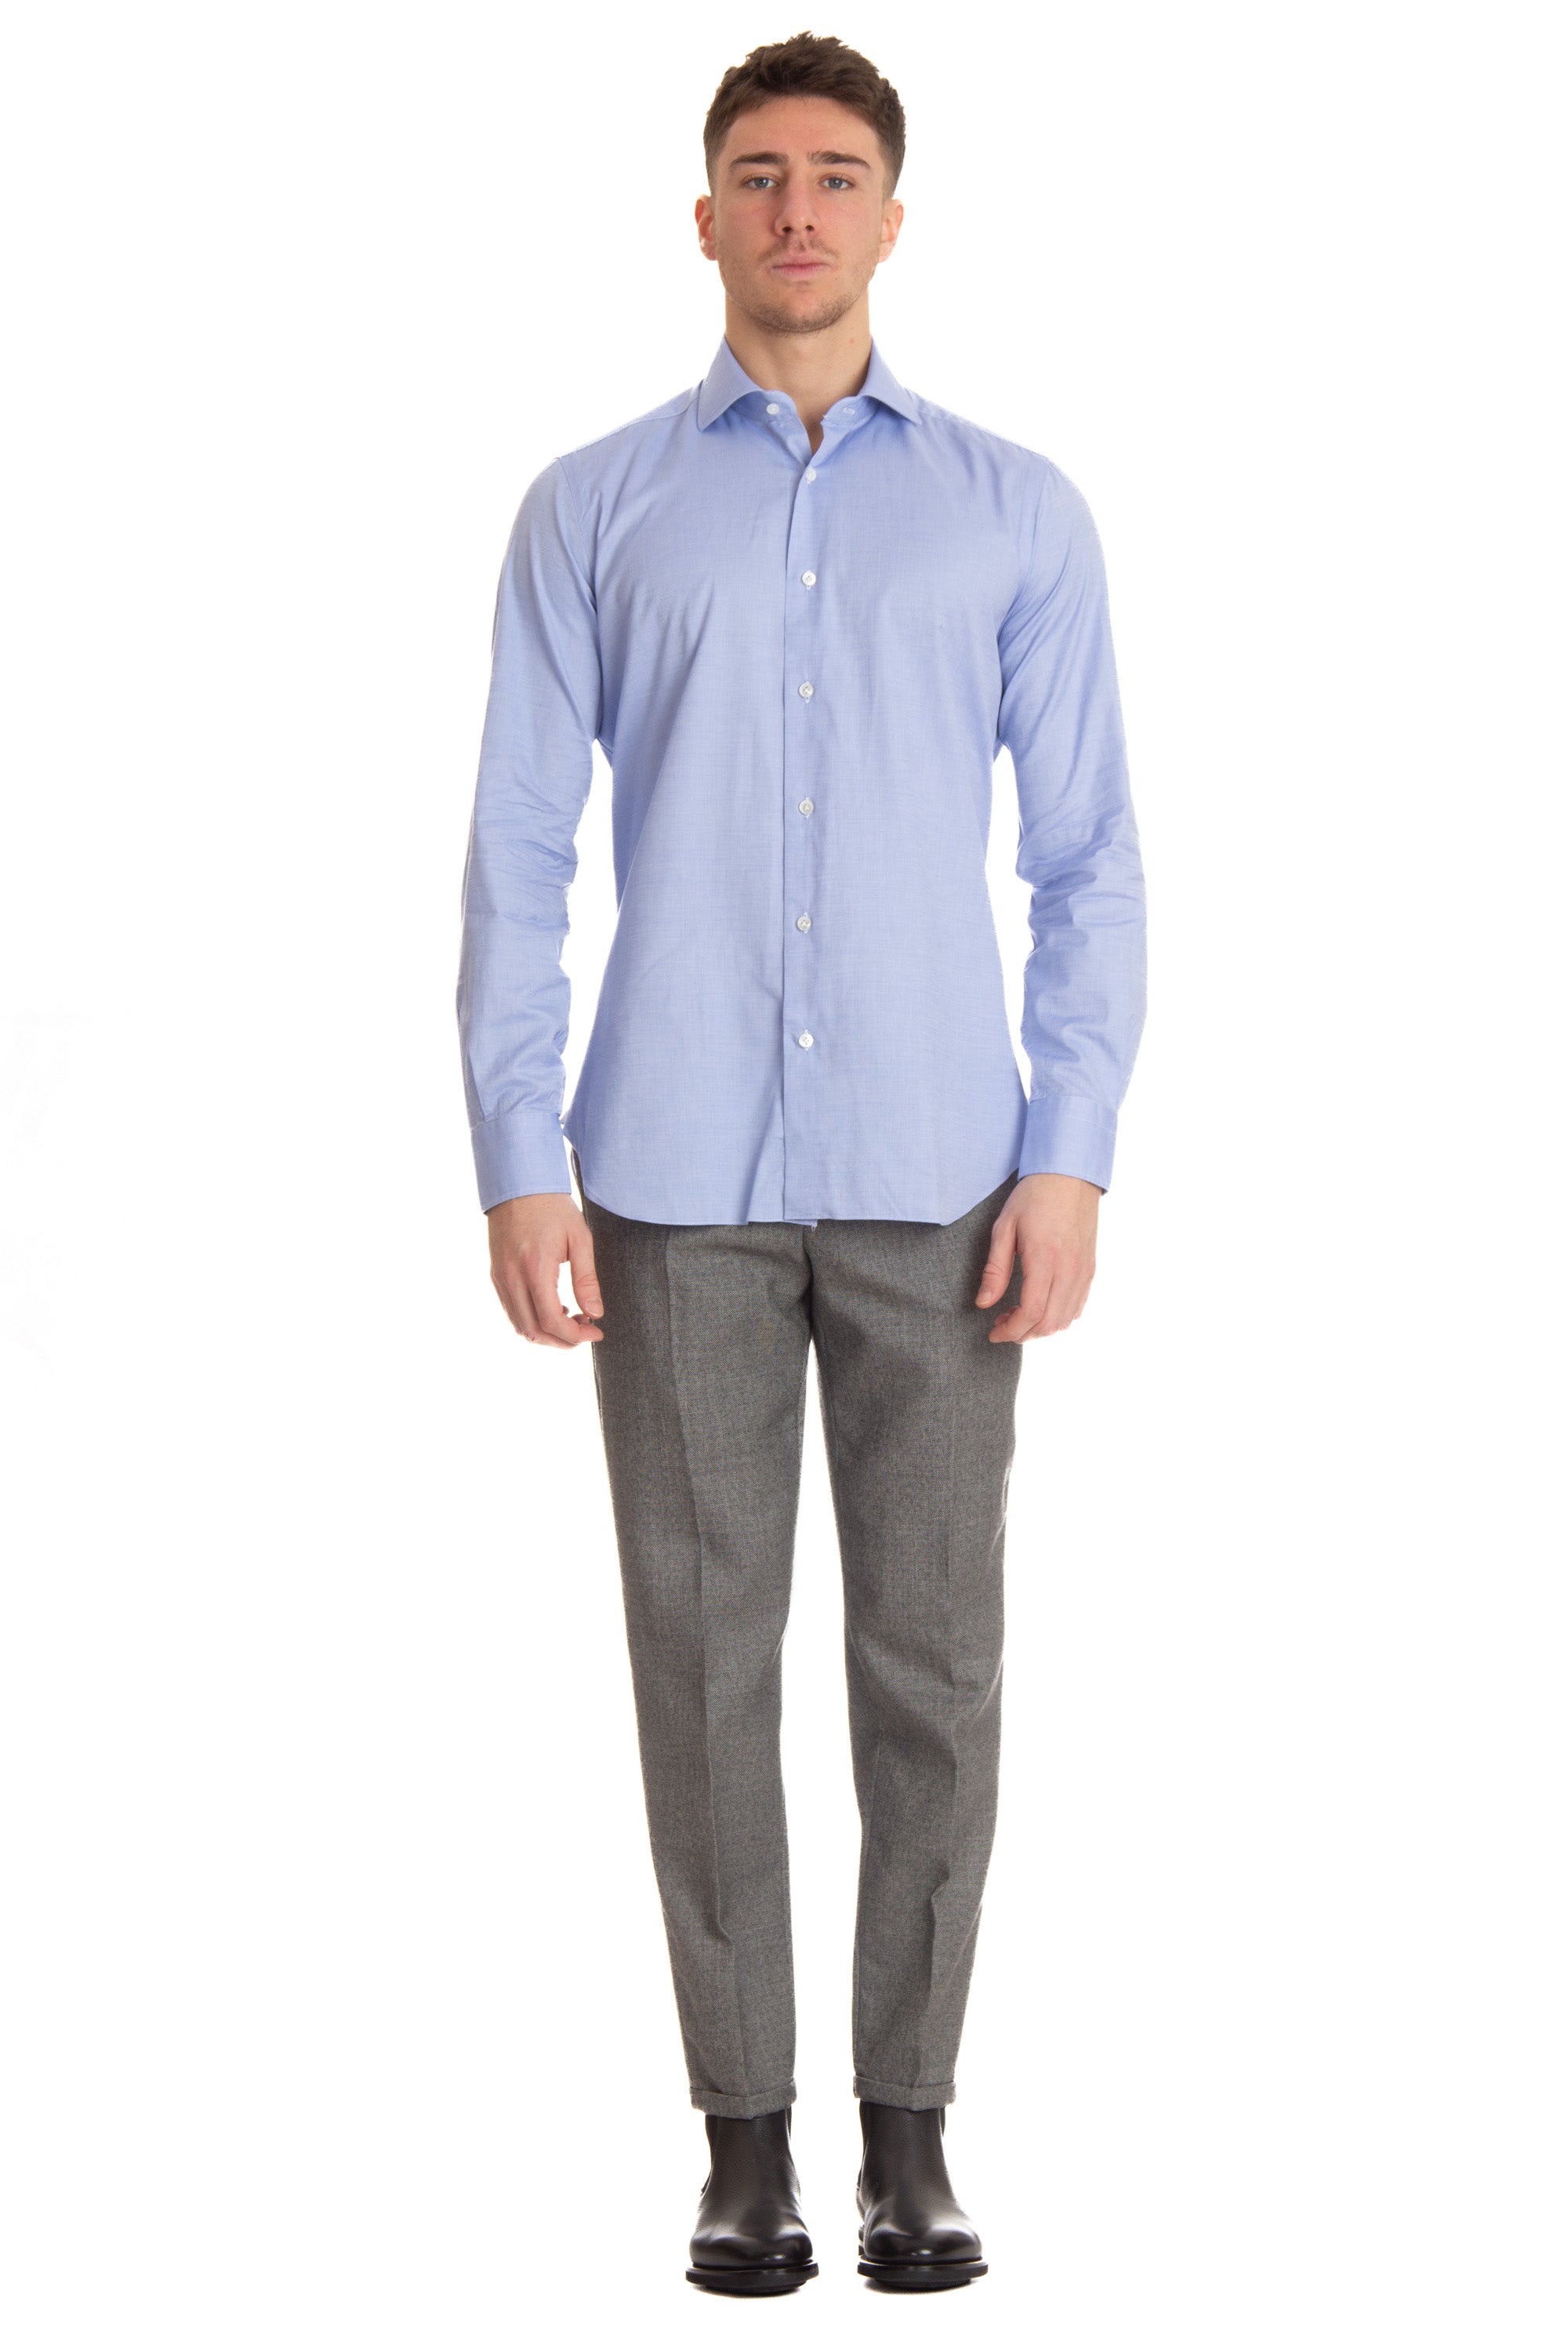 Tailored micro-check shirt from the Culto line